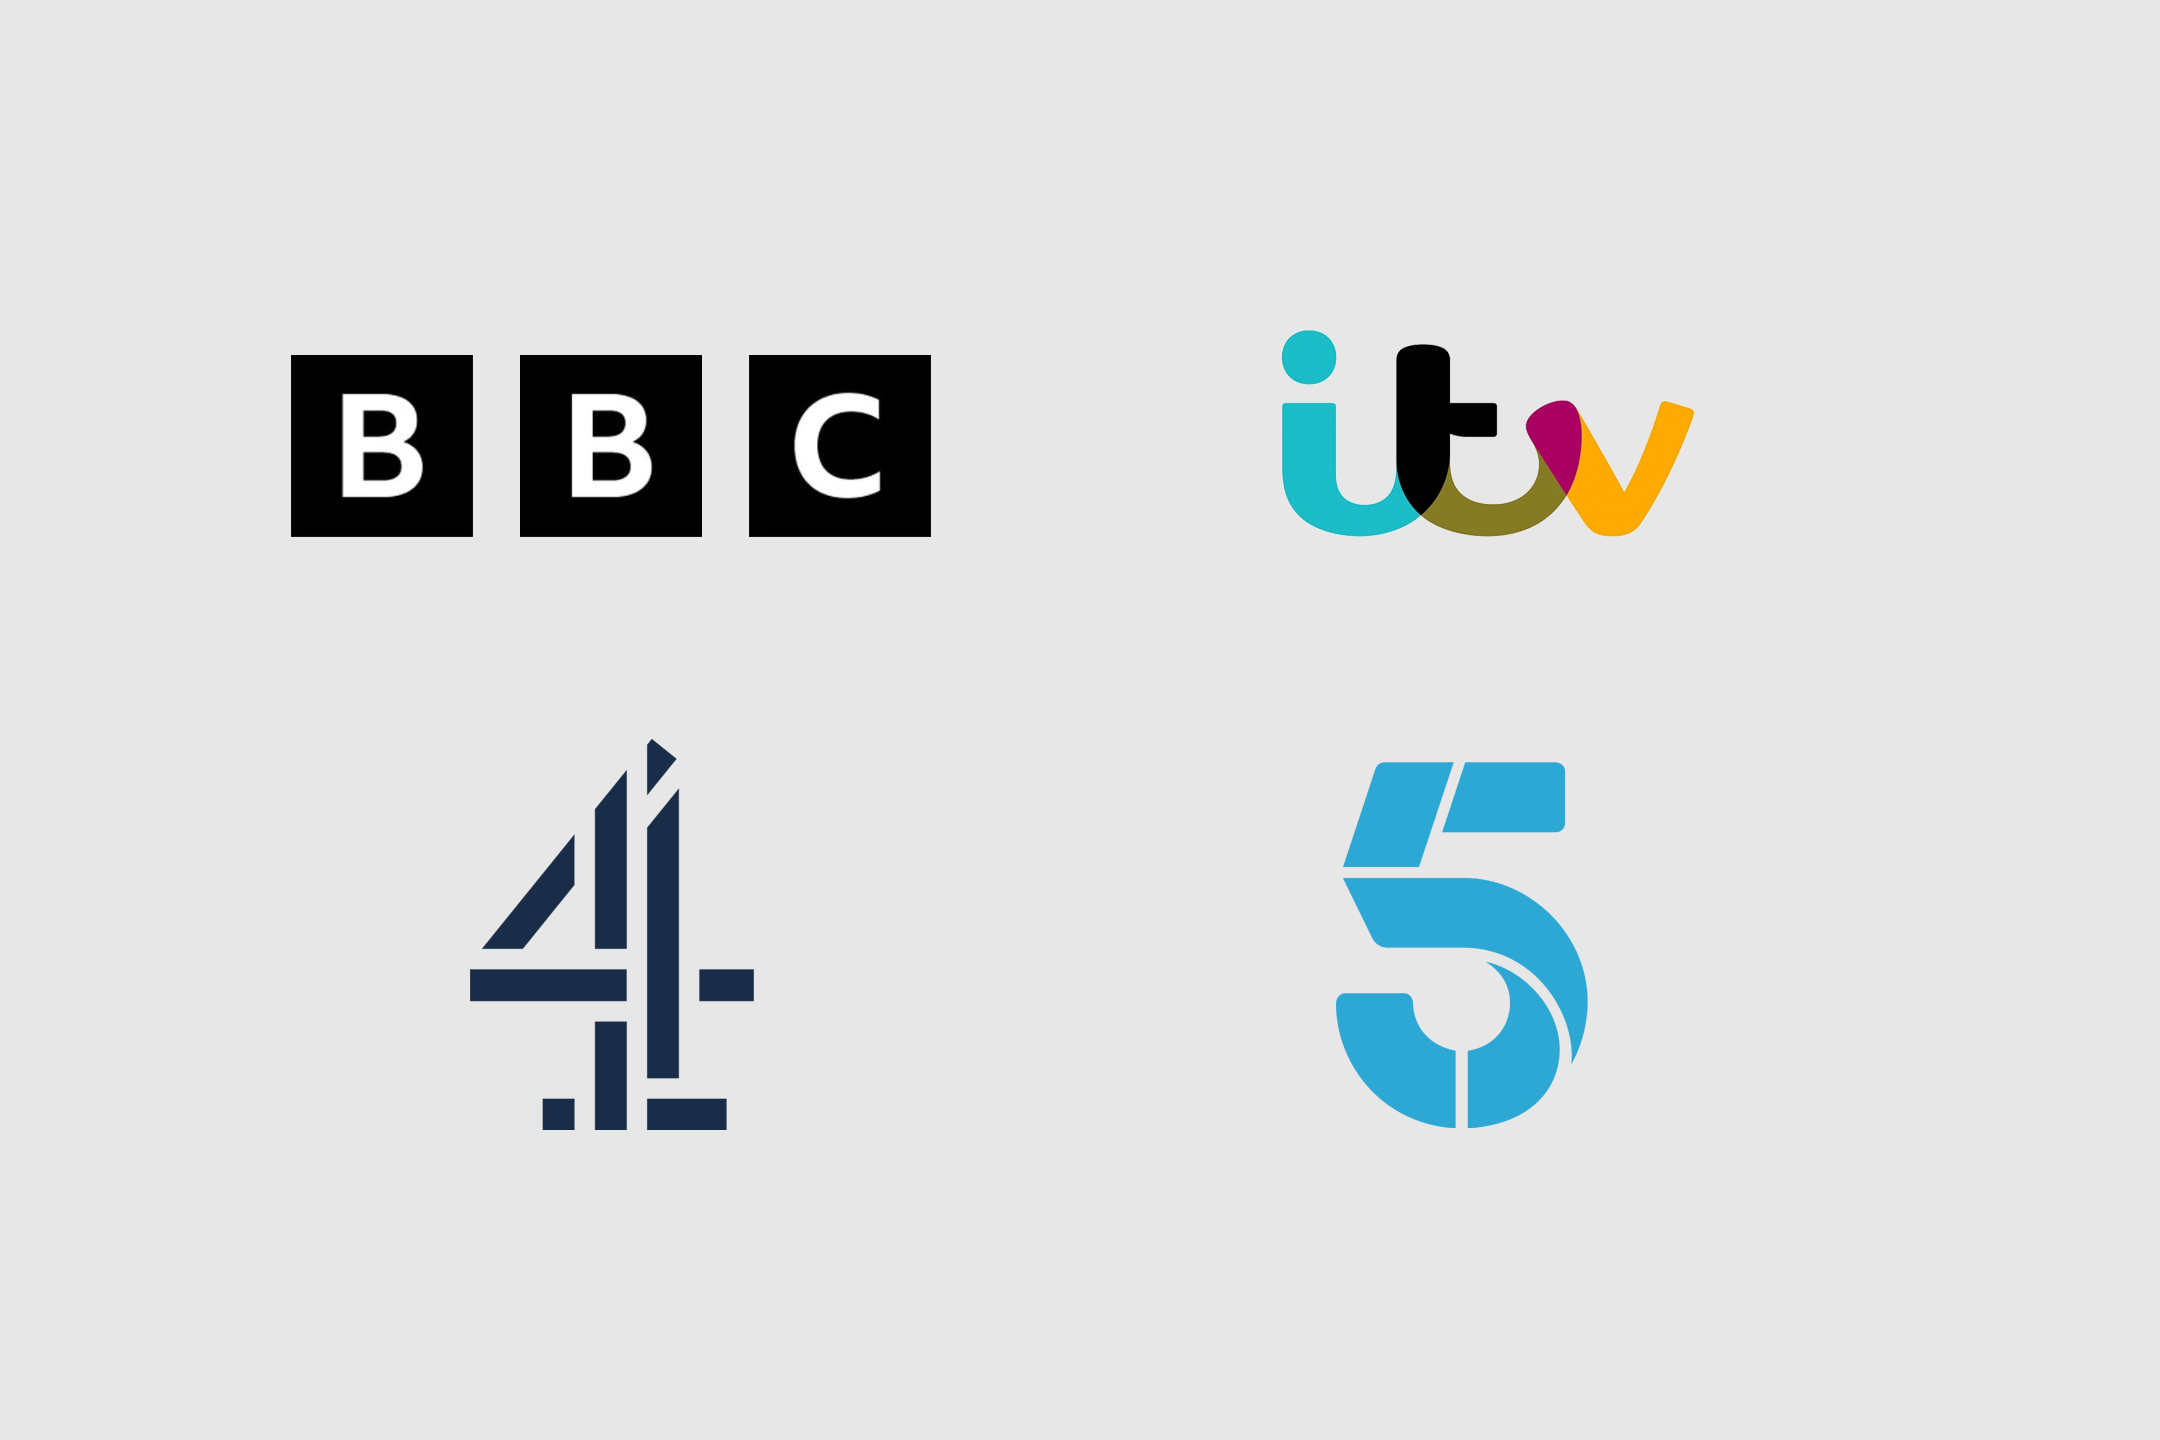 BBC, ITV, Channel 4 and Channel 5 logos